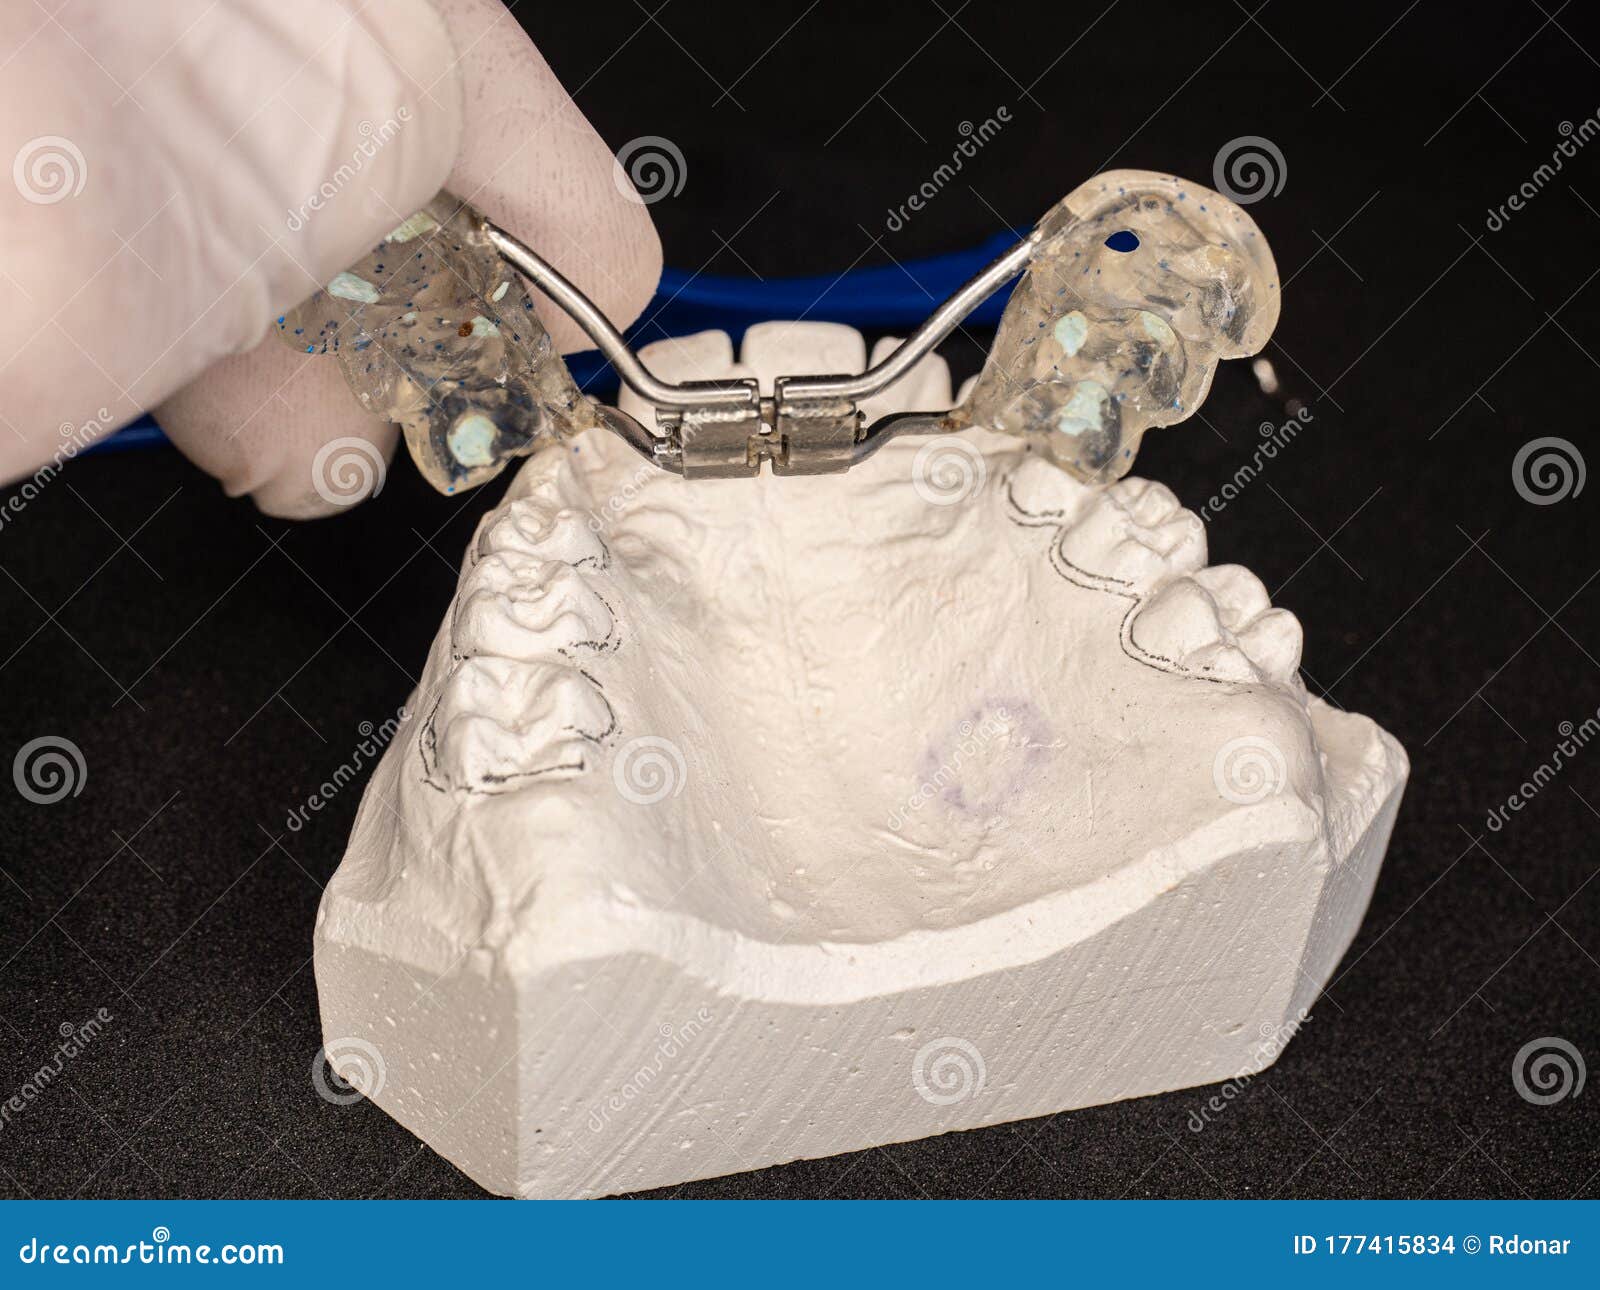 palatal expander for the maxilla, setting test